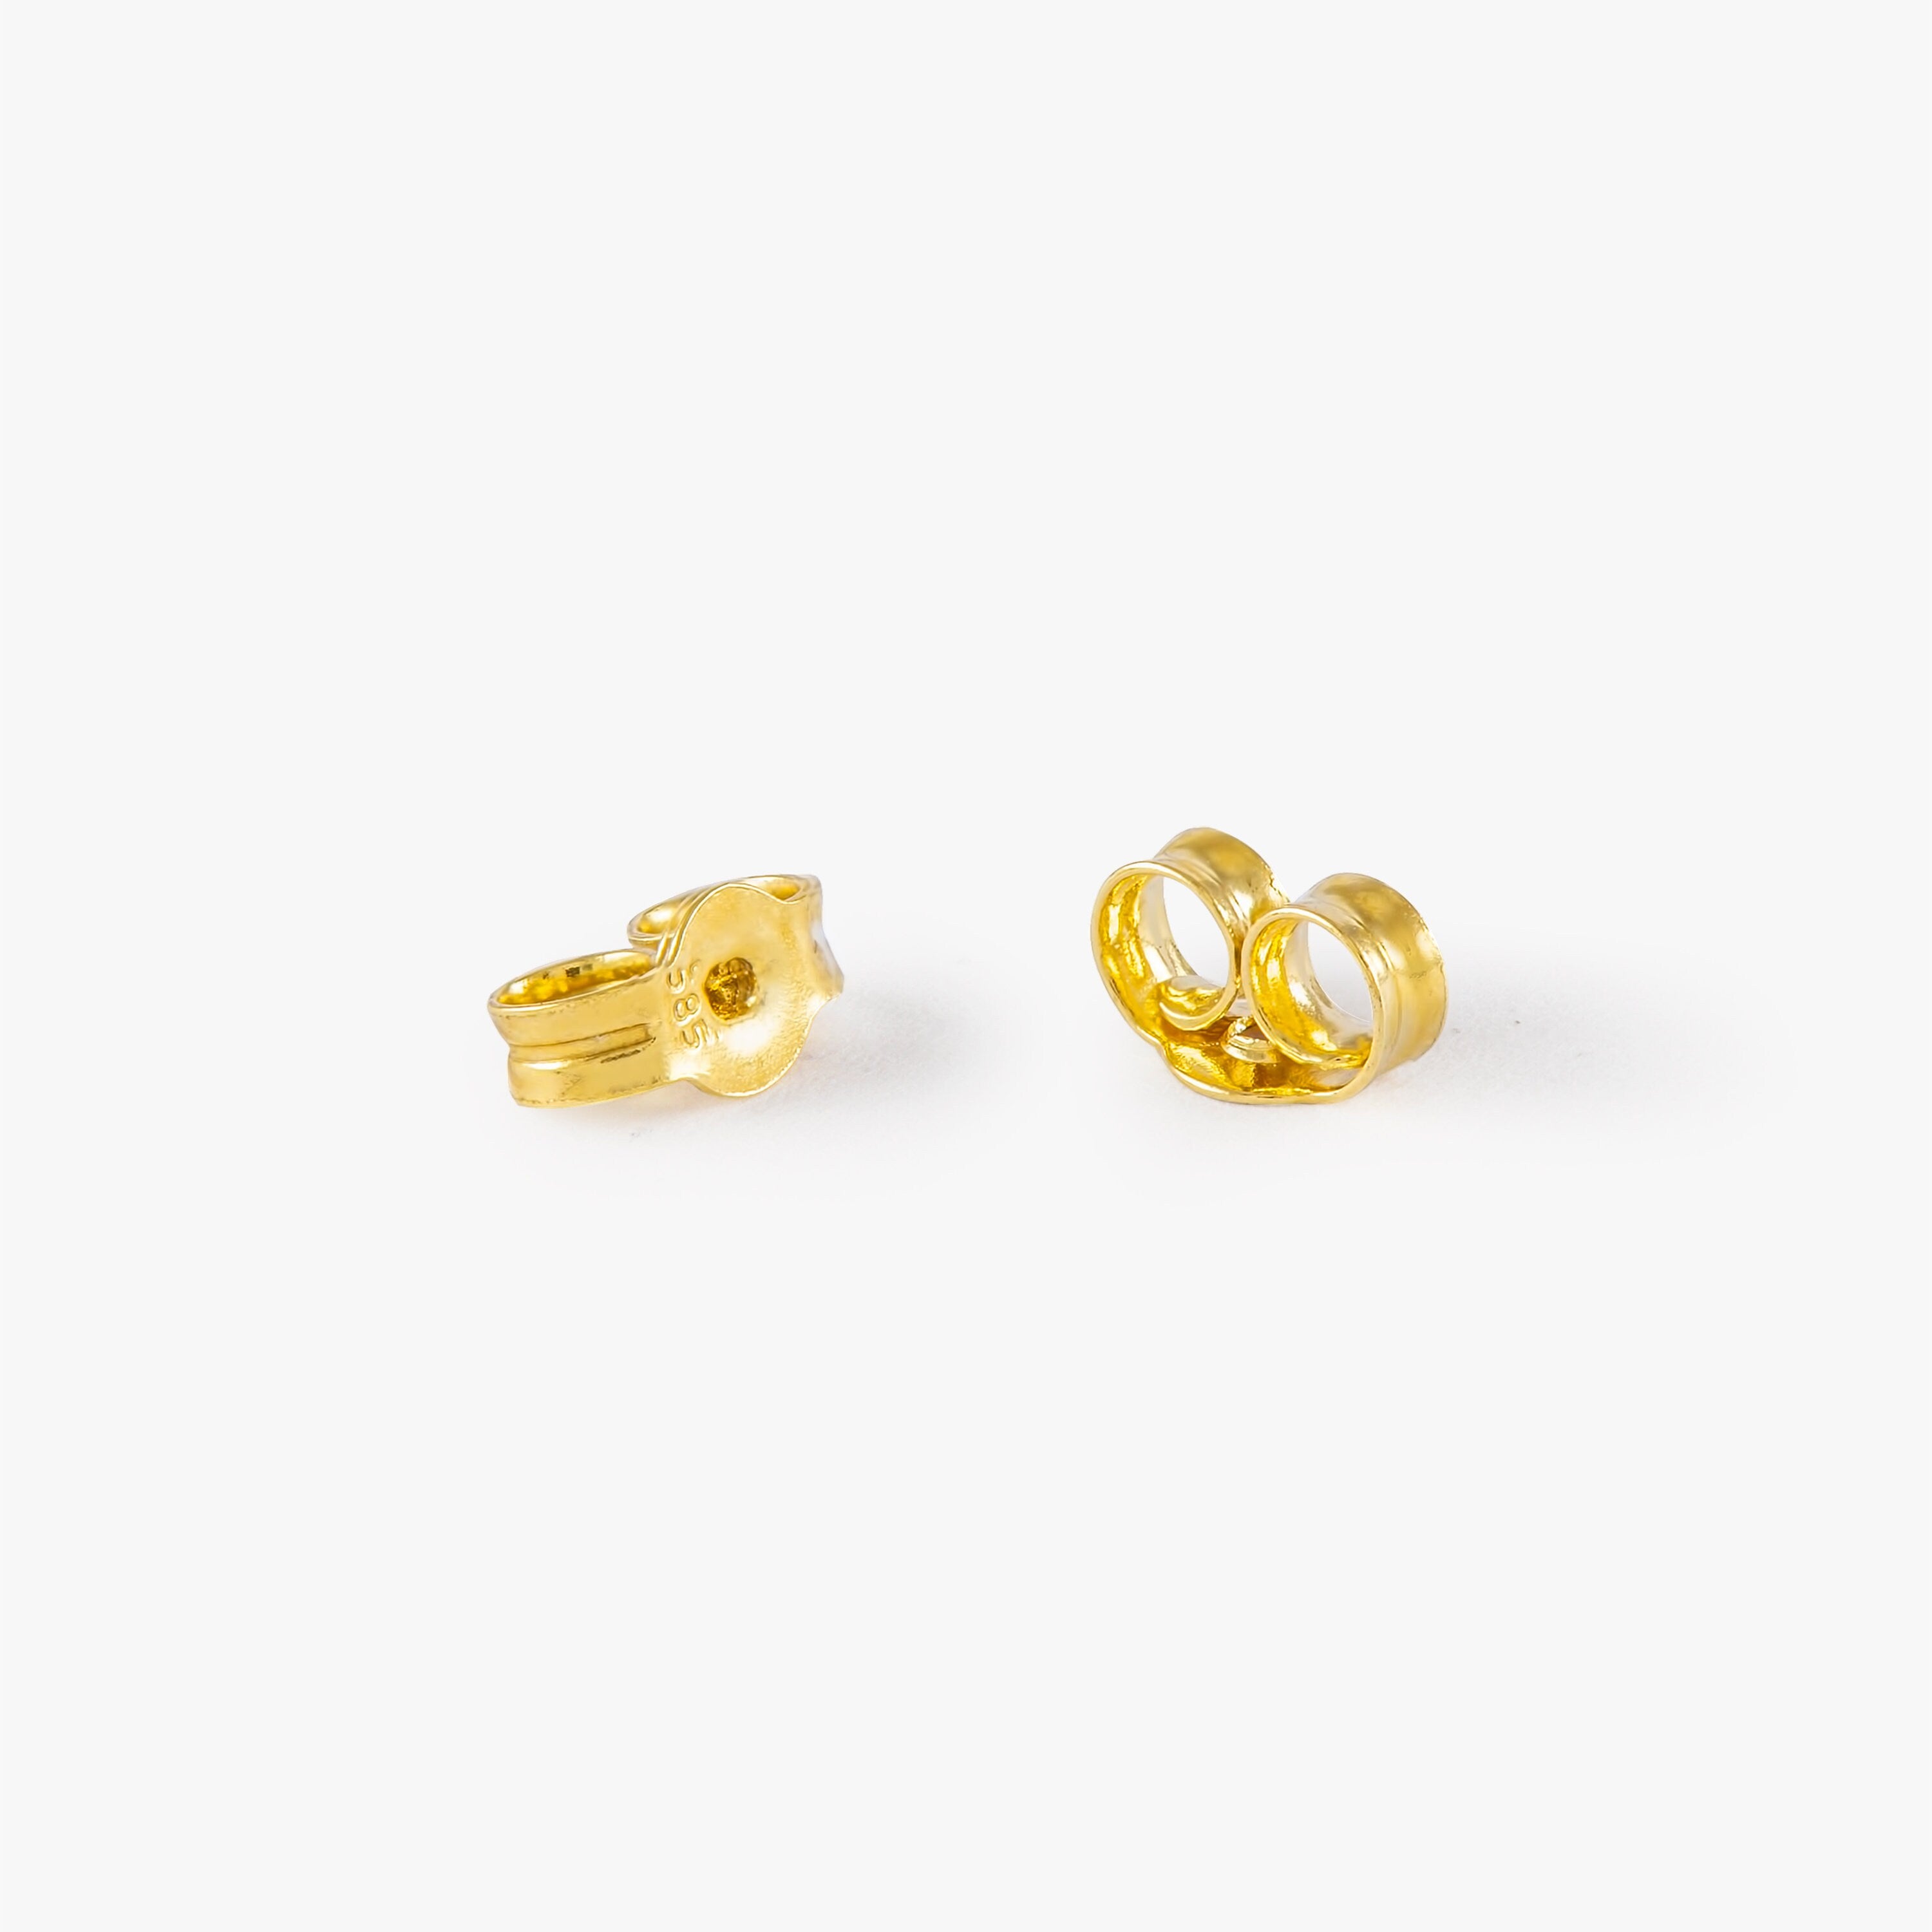 Three Diamond Studs Available in 14K and 18K Gold